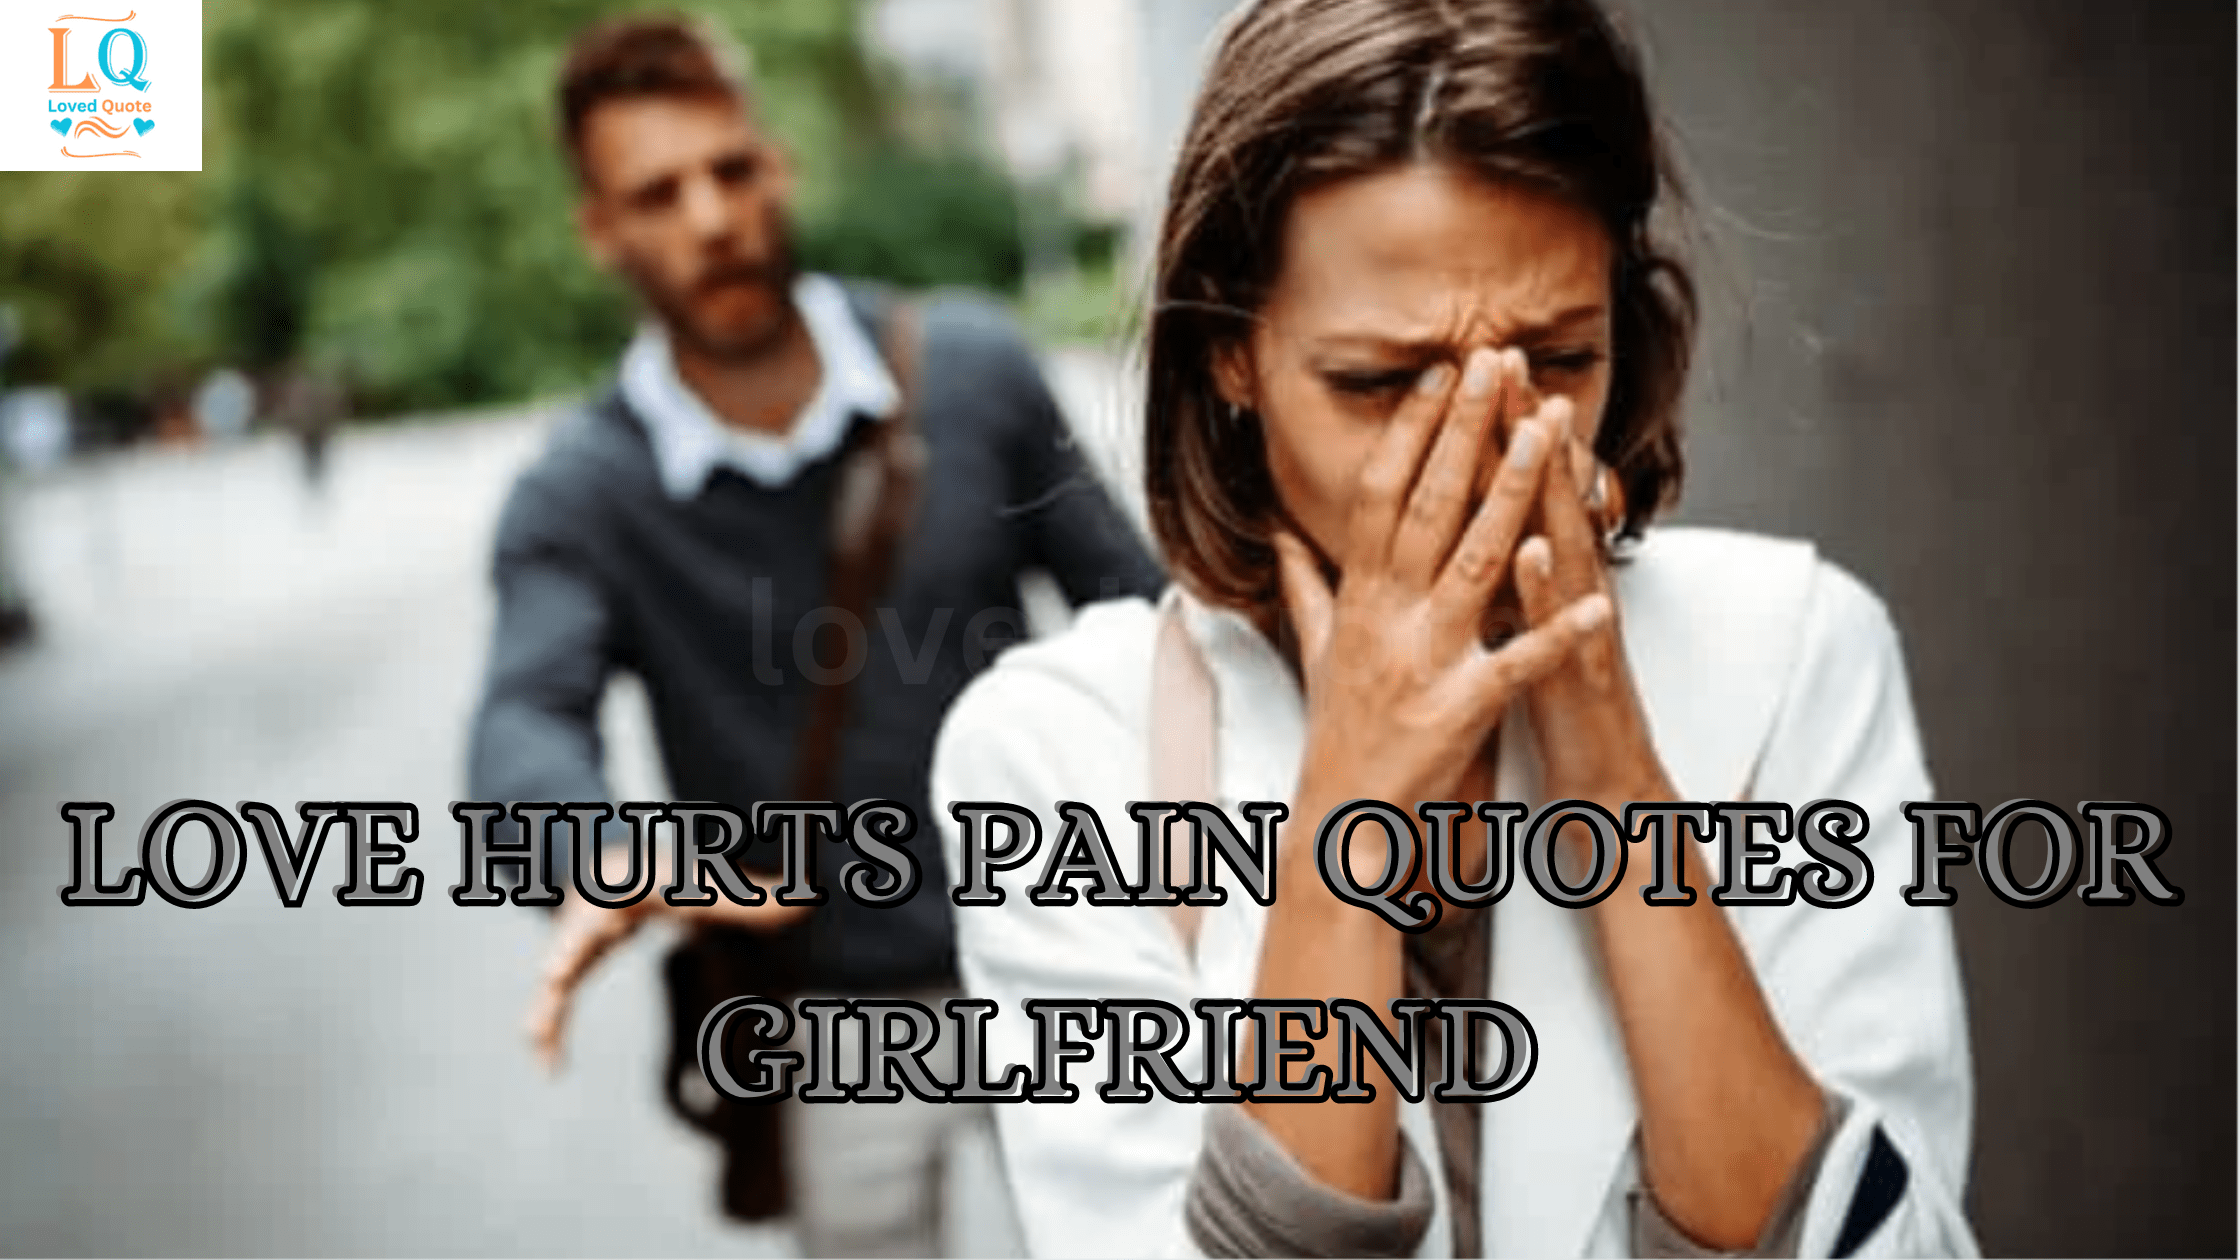 Love Hurts Pain Quotes for Girlfriend